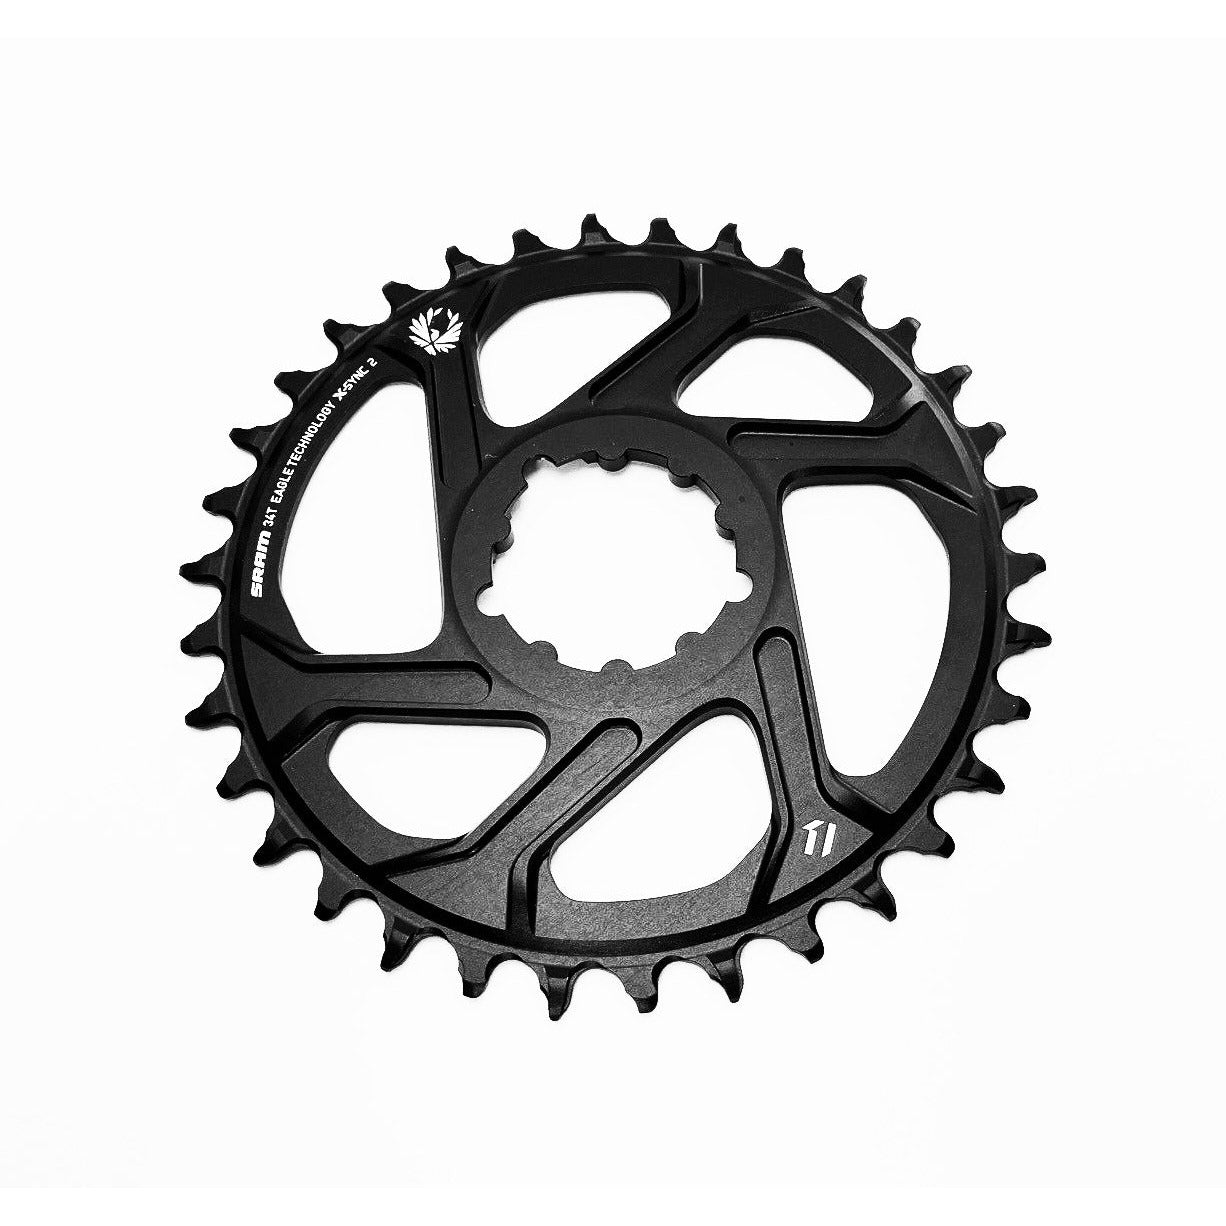 SRAM X-Sync 2 Eagle Direct Mount Chainring 34 Tooth 3mm Boost 12 Speed